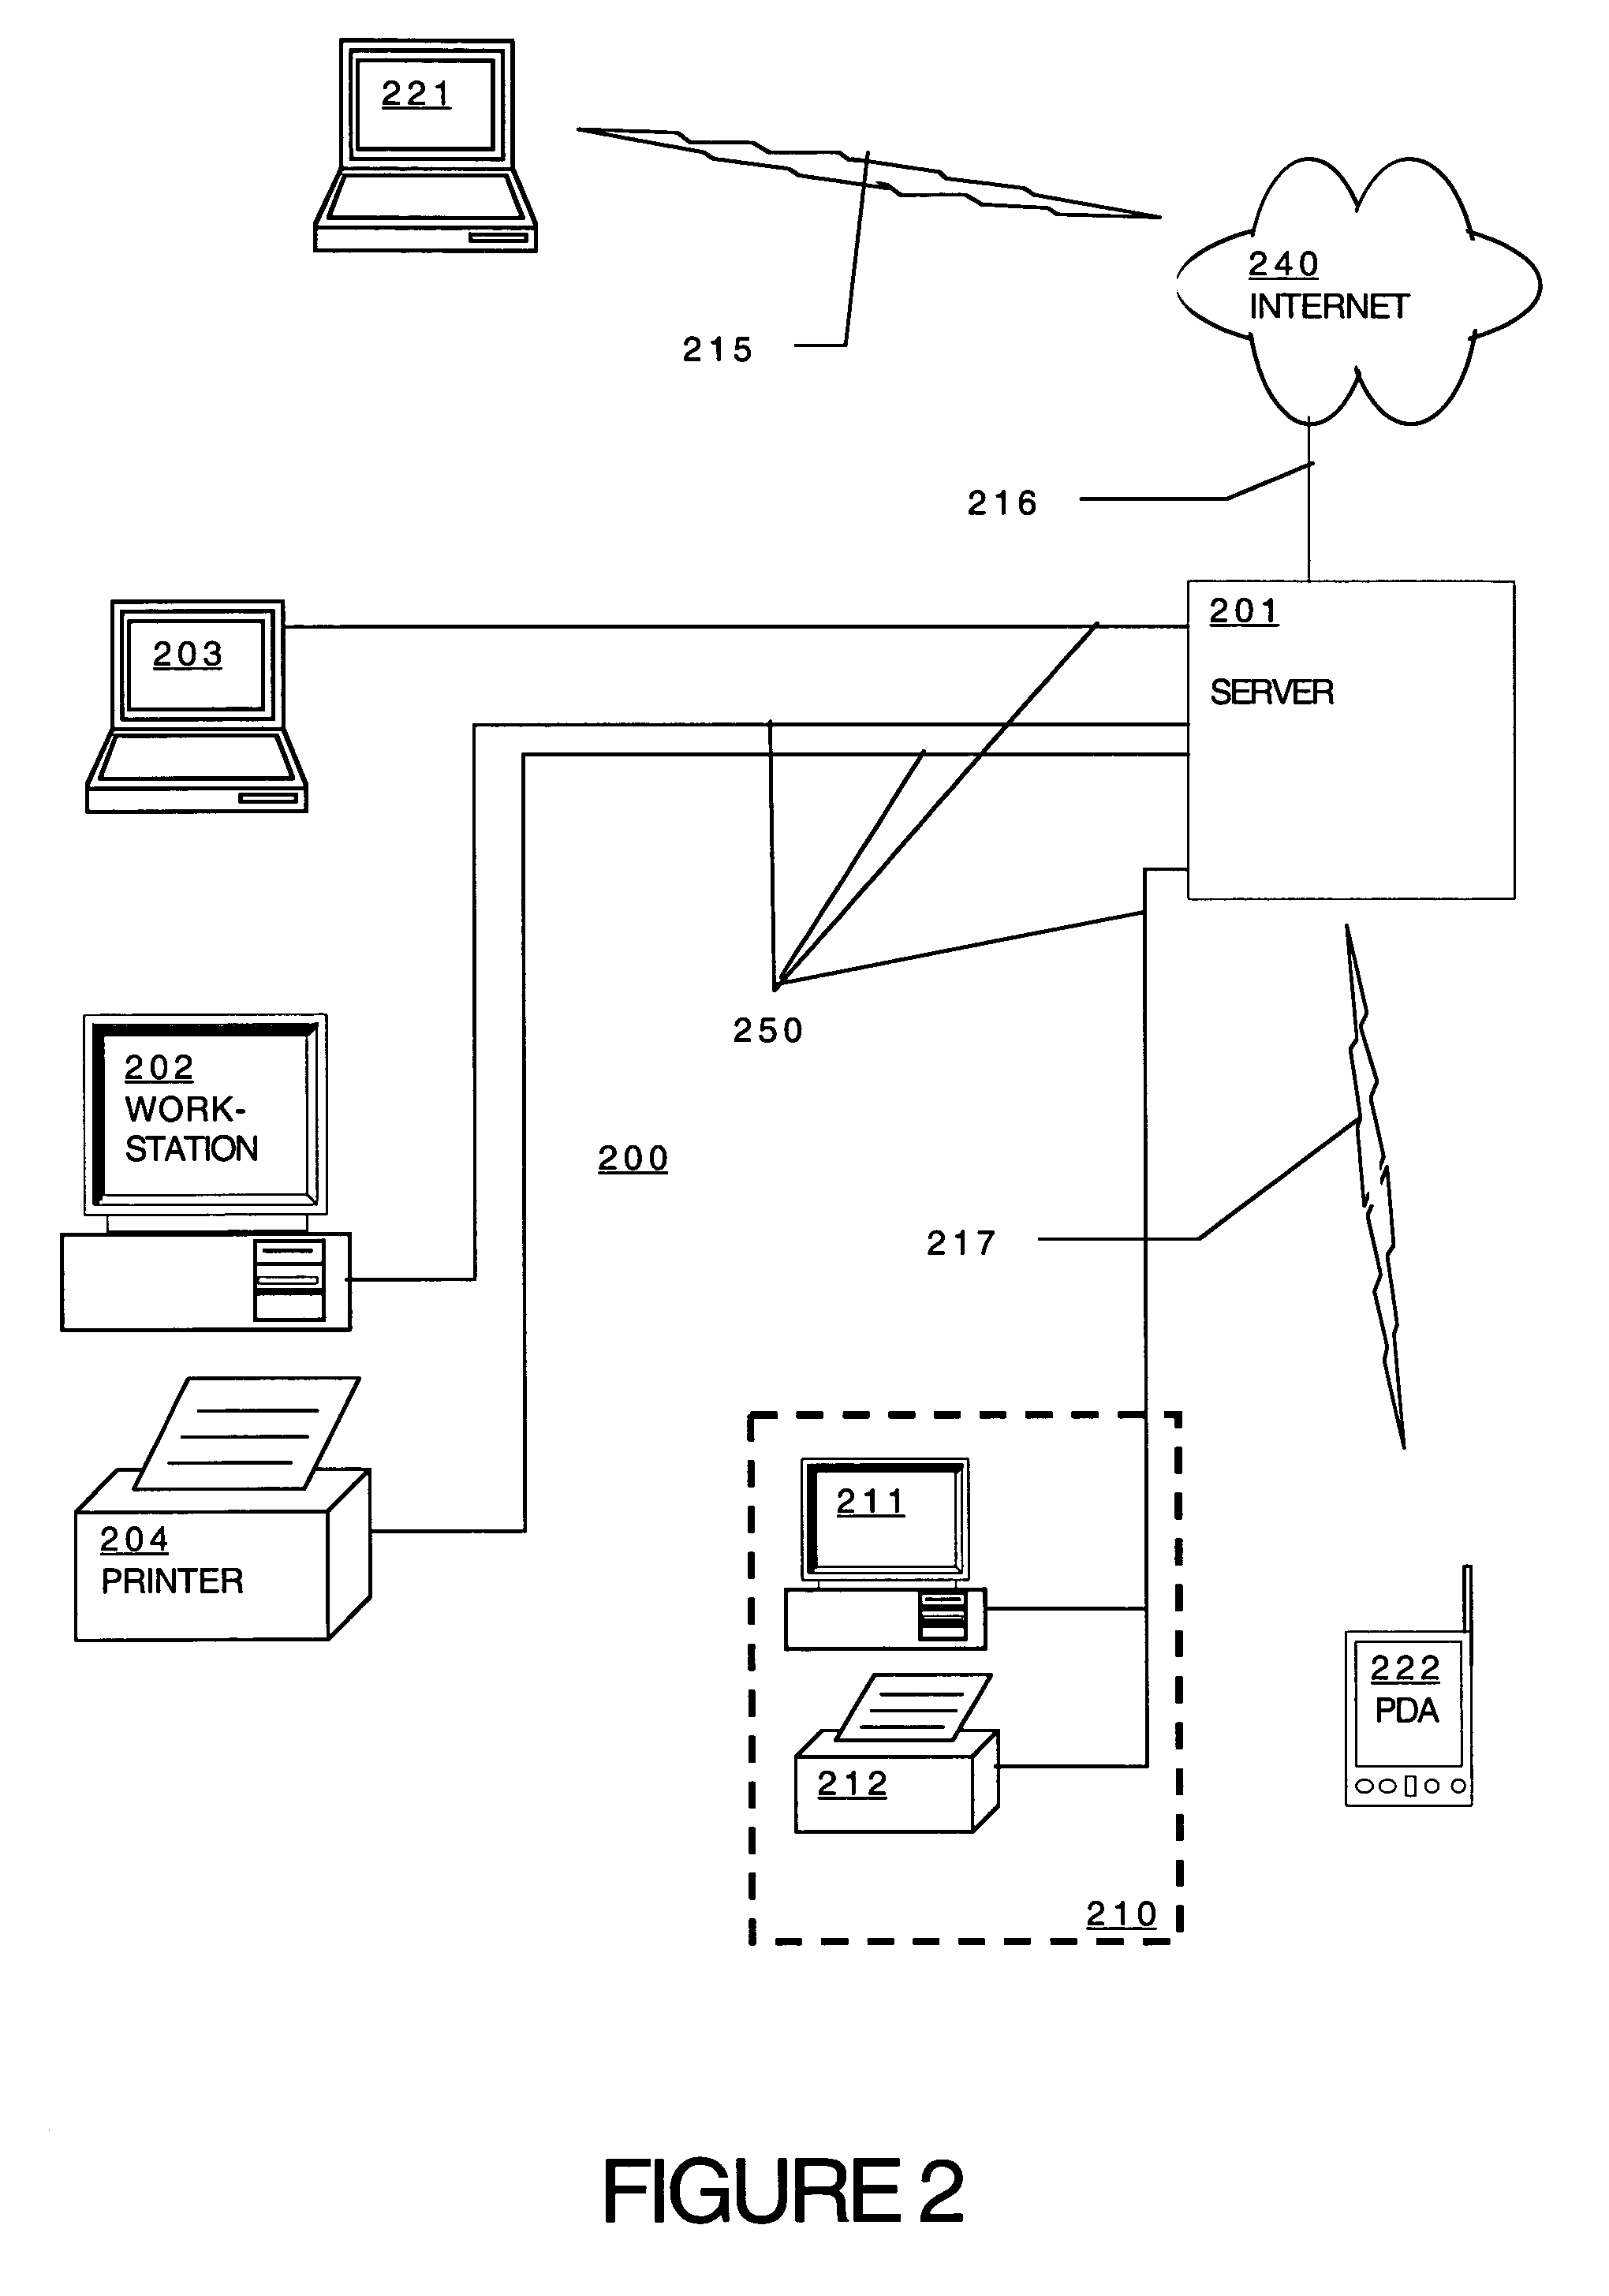 Method for configuring a network intrusion detection system